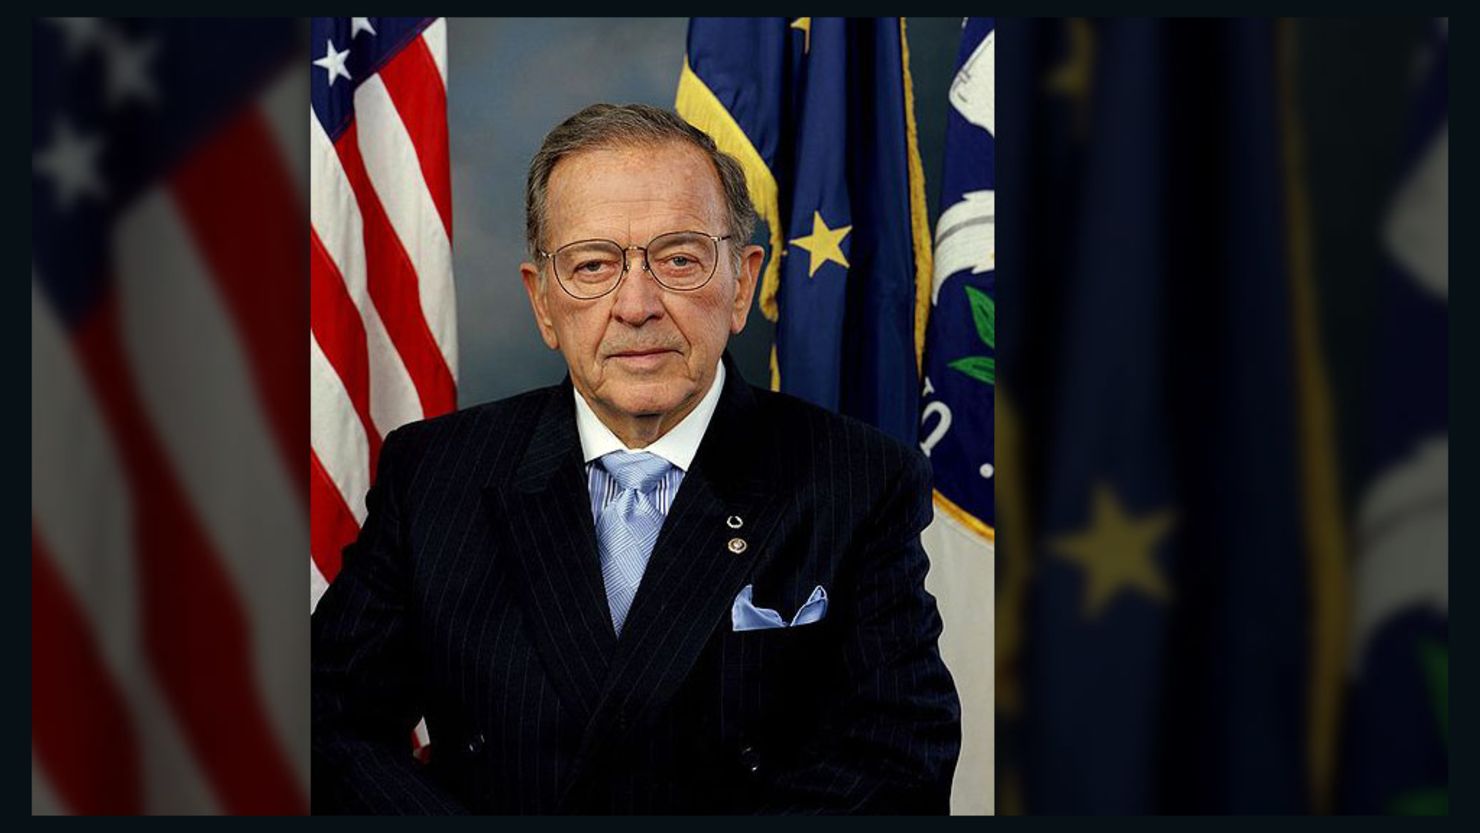 The case against former Alaska Sen. Ted Stevens was thrown out in 2009. He died in a plane crash in 2010.